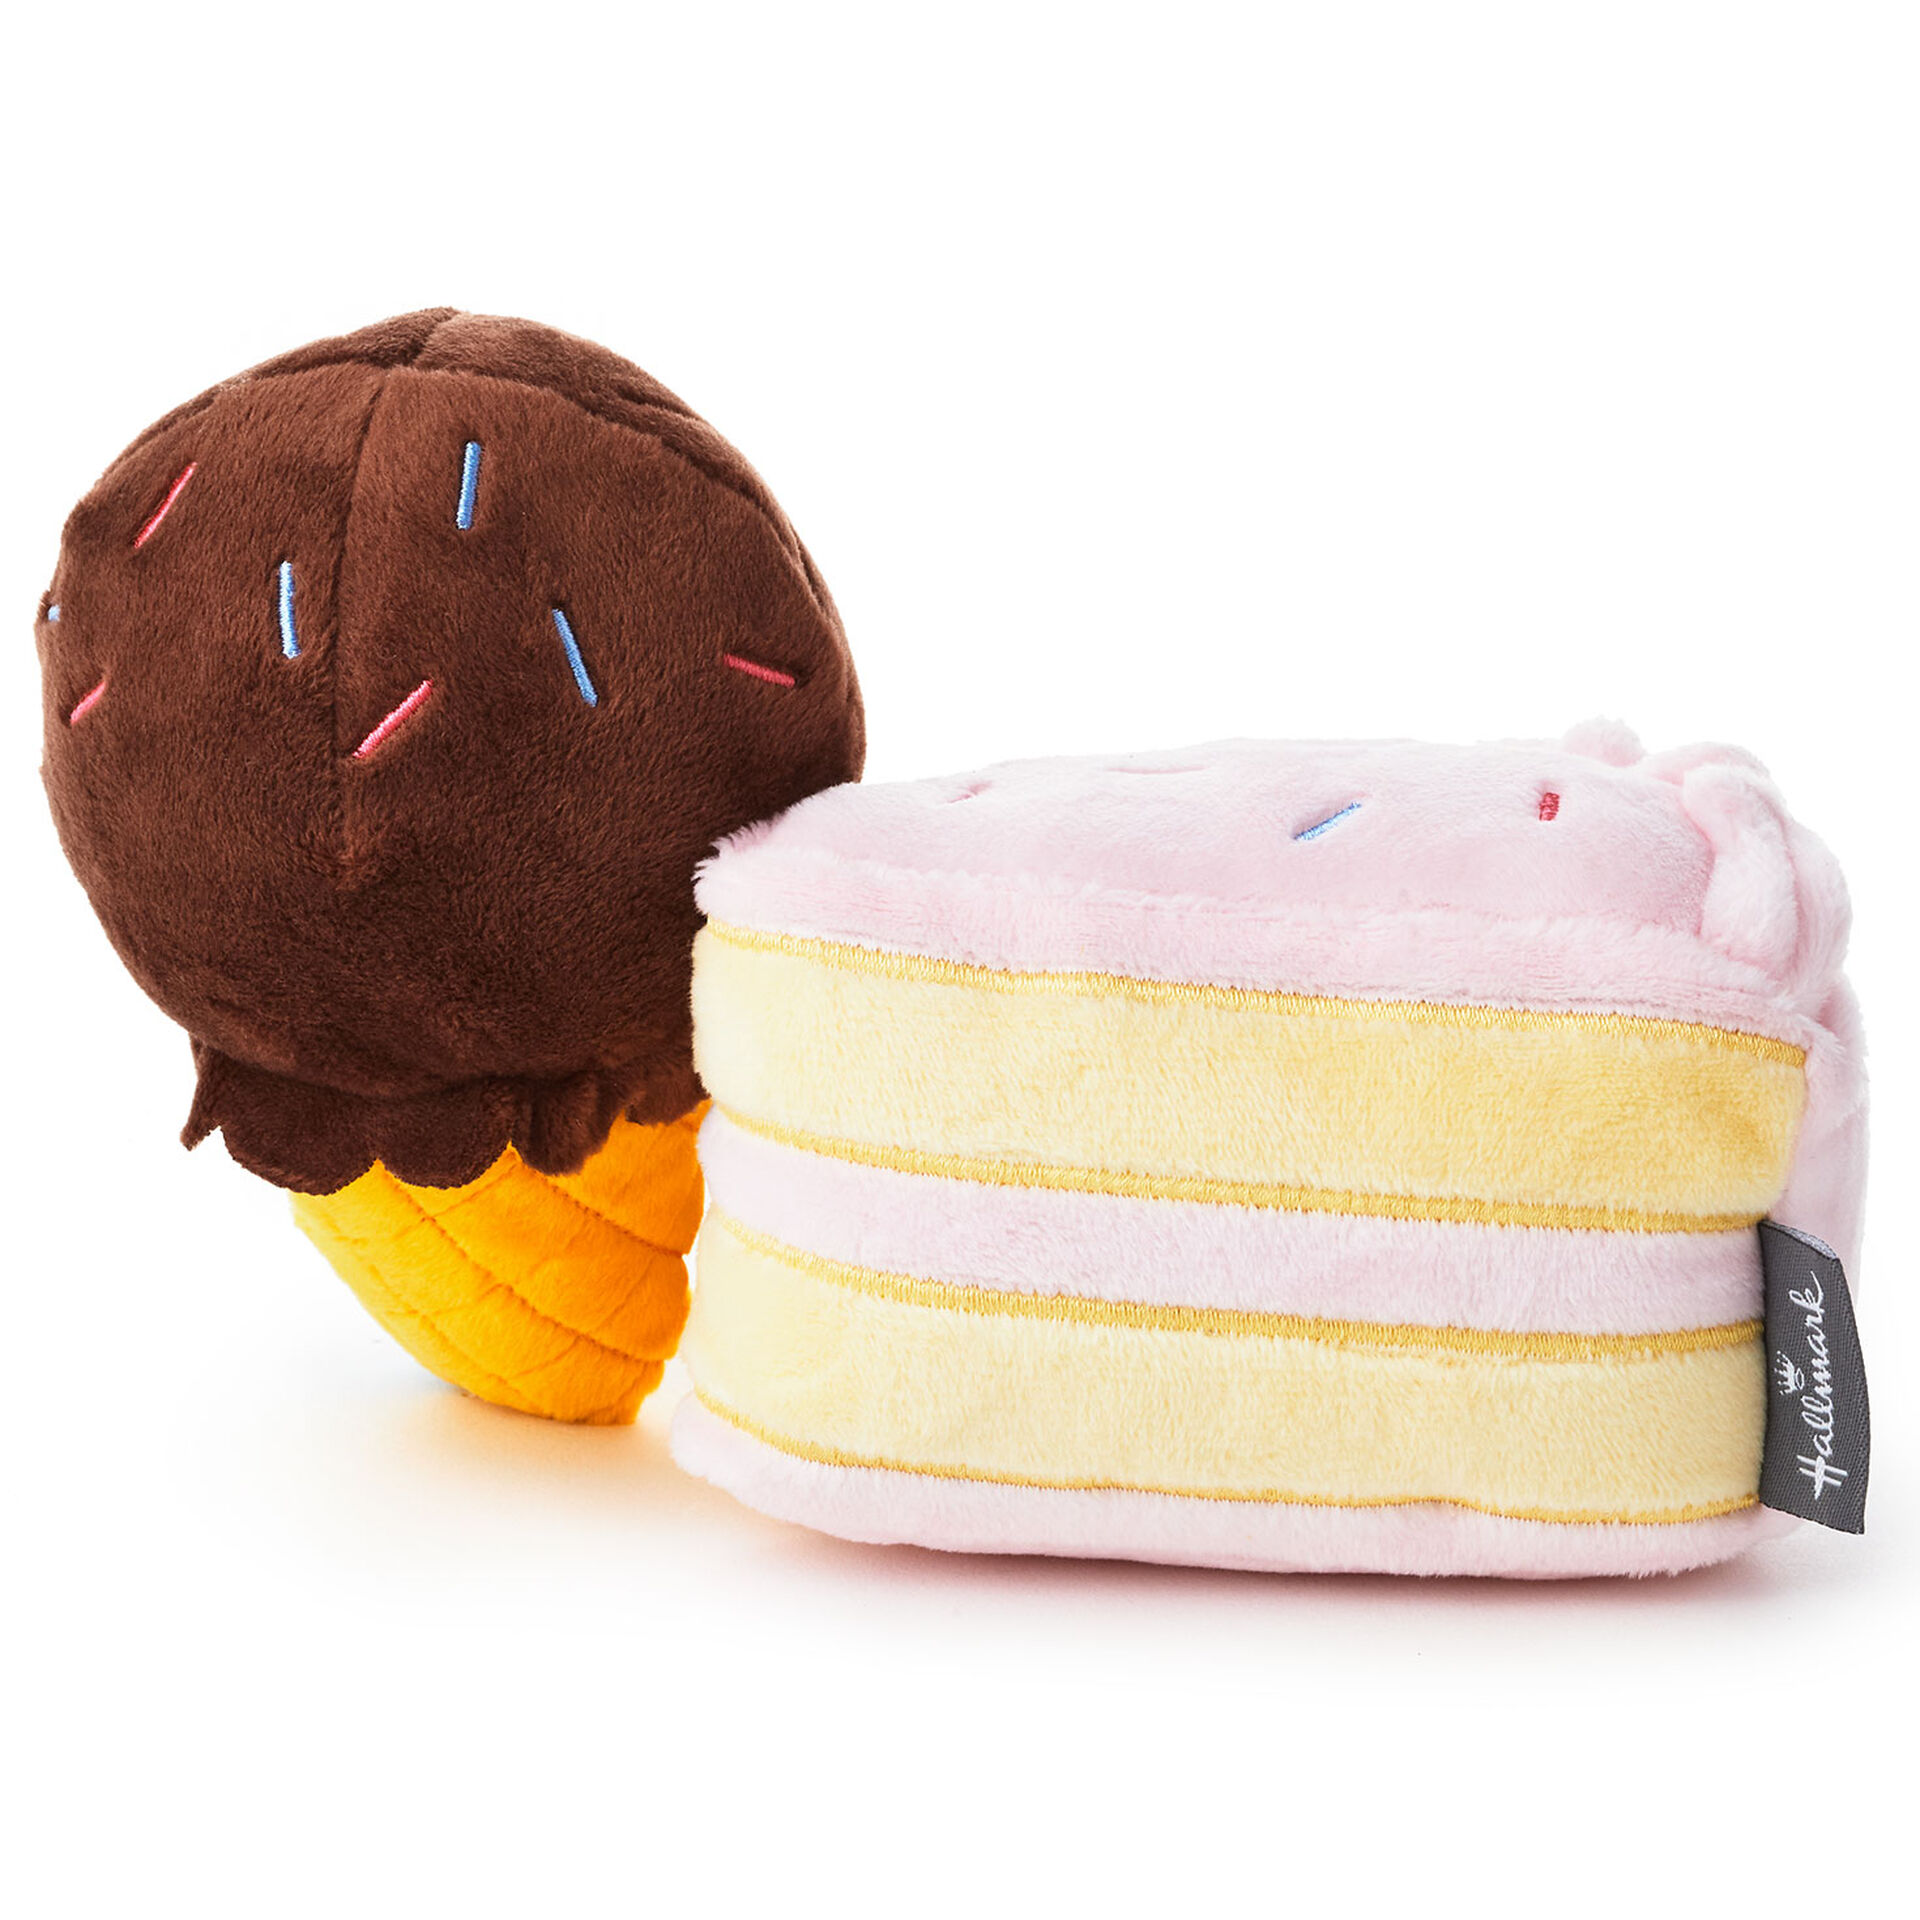 Better Together Cake and Ice Cream Magnetic Plush, 5.25" - Classic